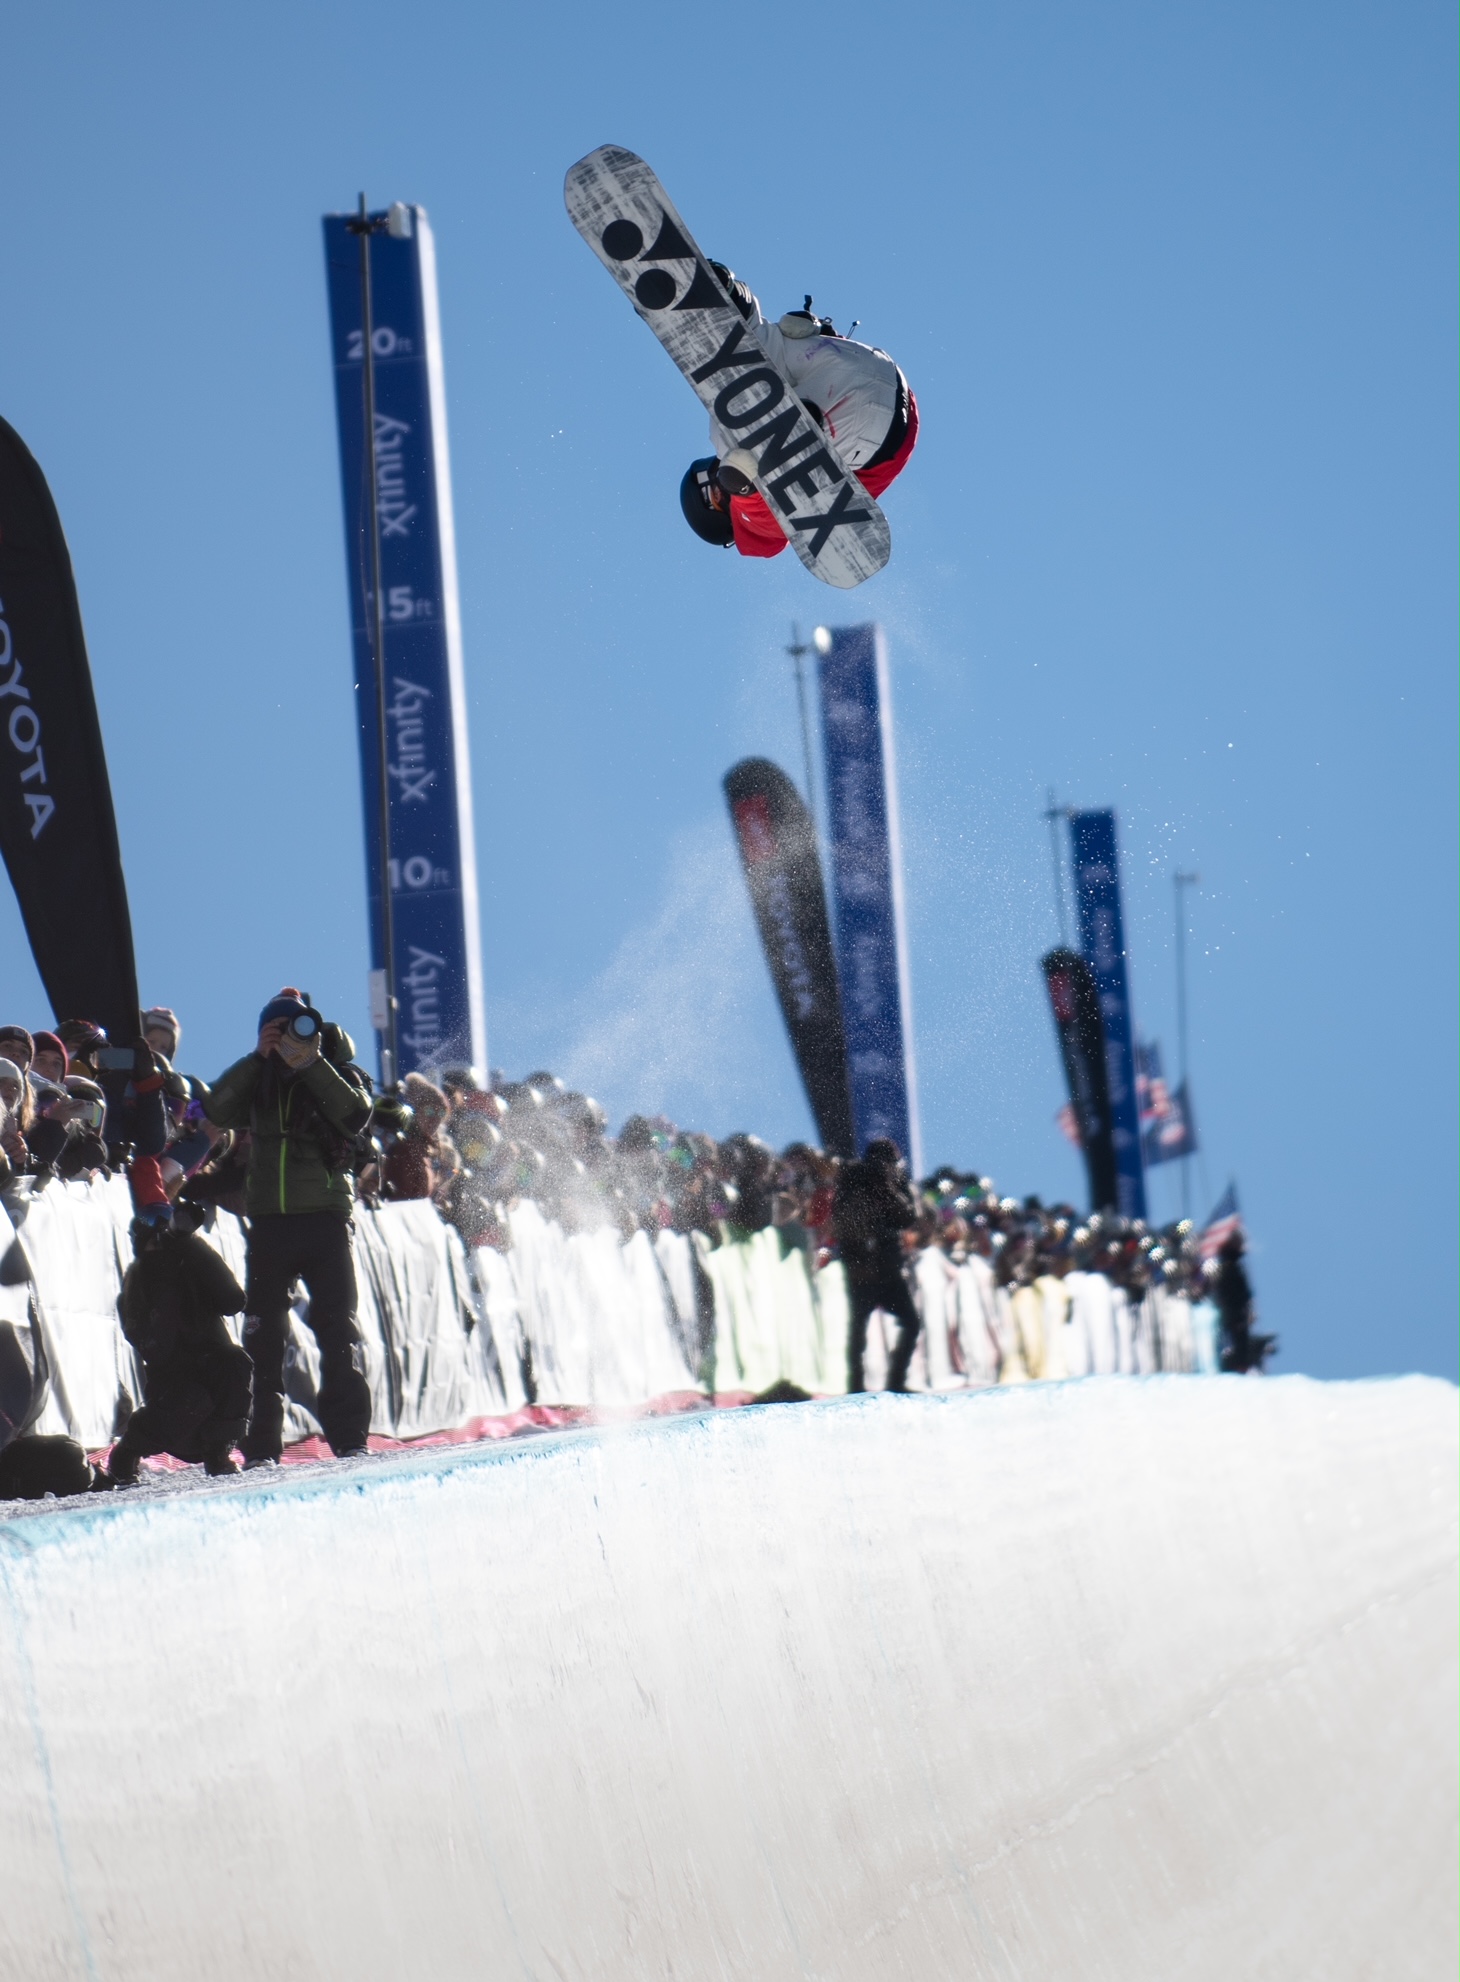 Monster Energy’s Yuto Totsuka Takes Third Place in Men’s Snowboard Halfpipe at 2021 Toyota U.S. Grand Prix at Copper Mountain